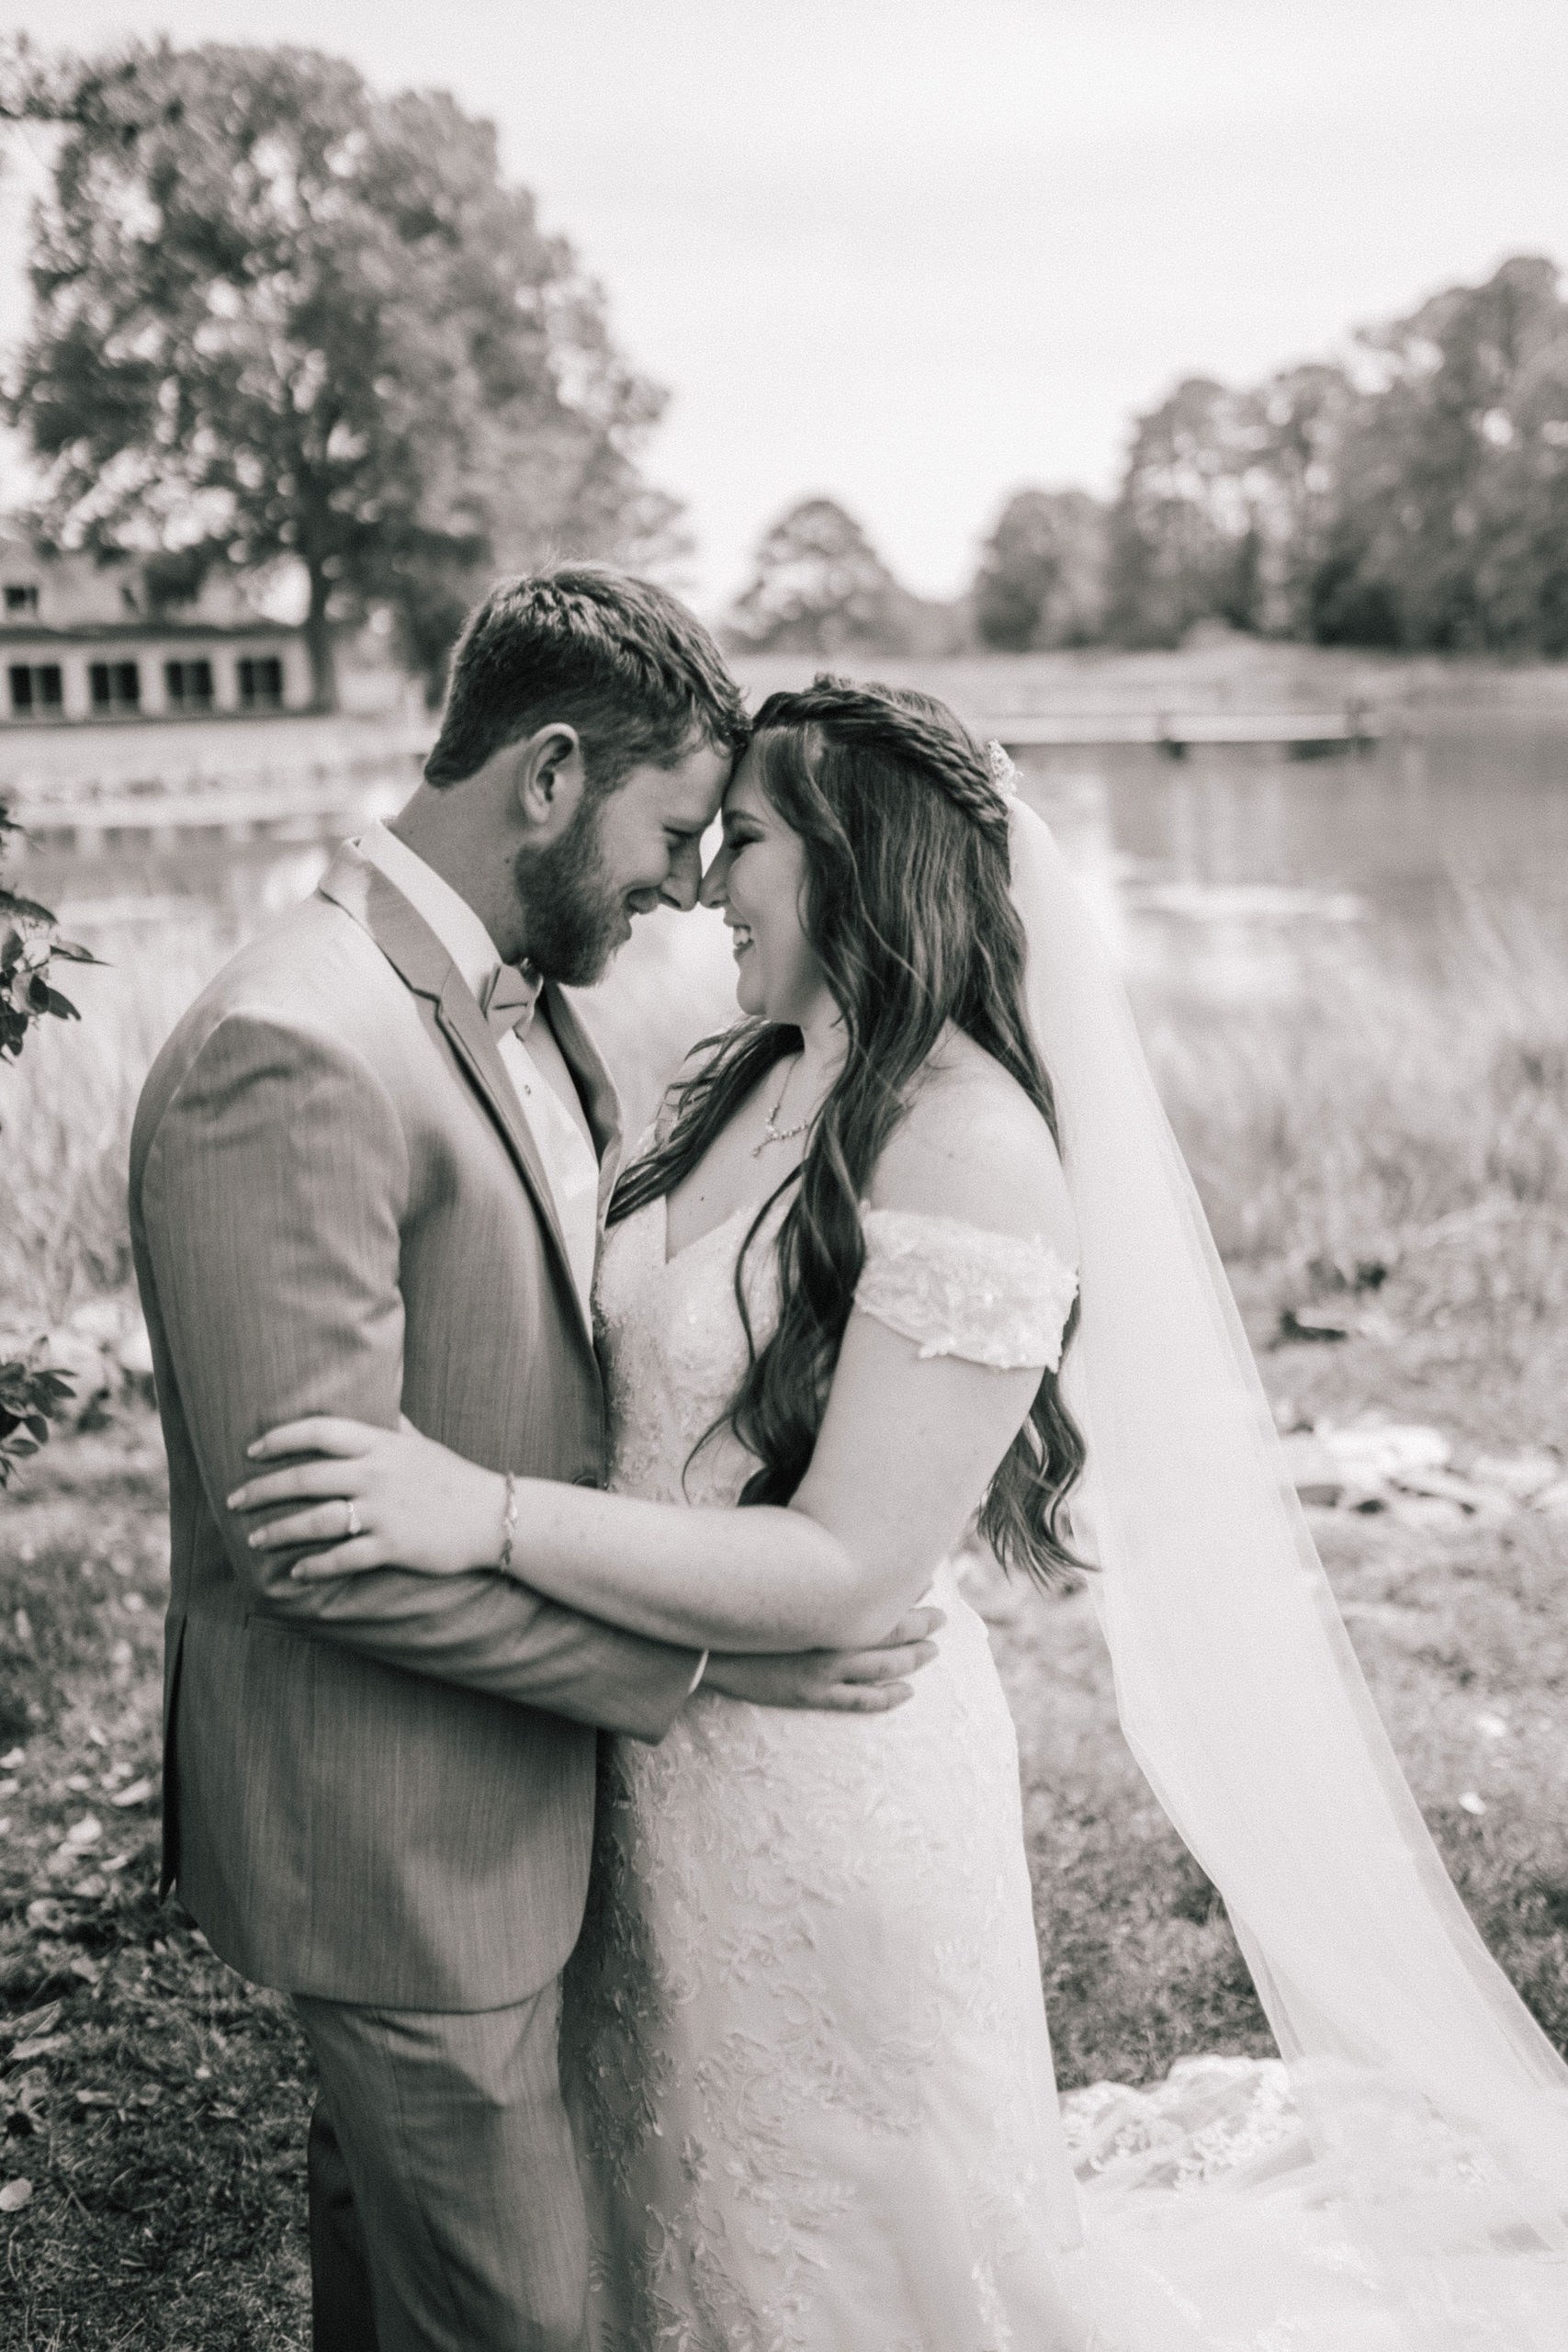 black and white image of bride and groom embracing each other nextto a river at their wedding venue in Maryland